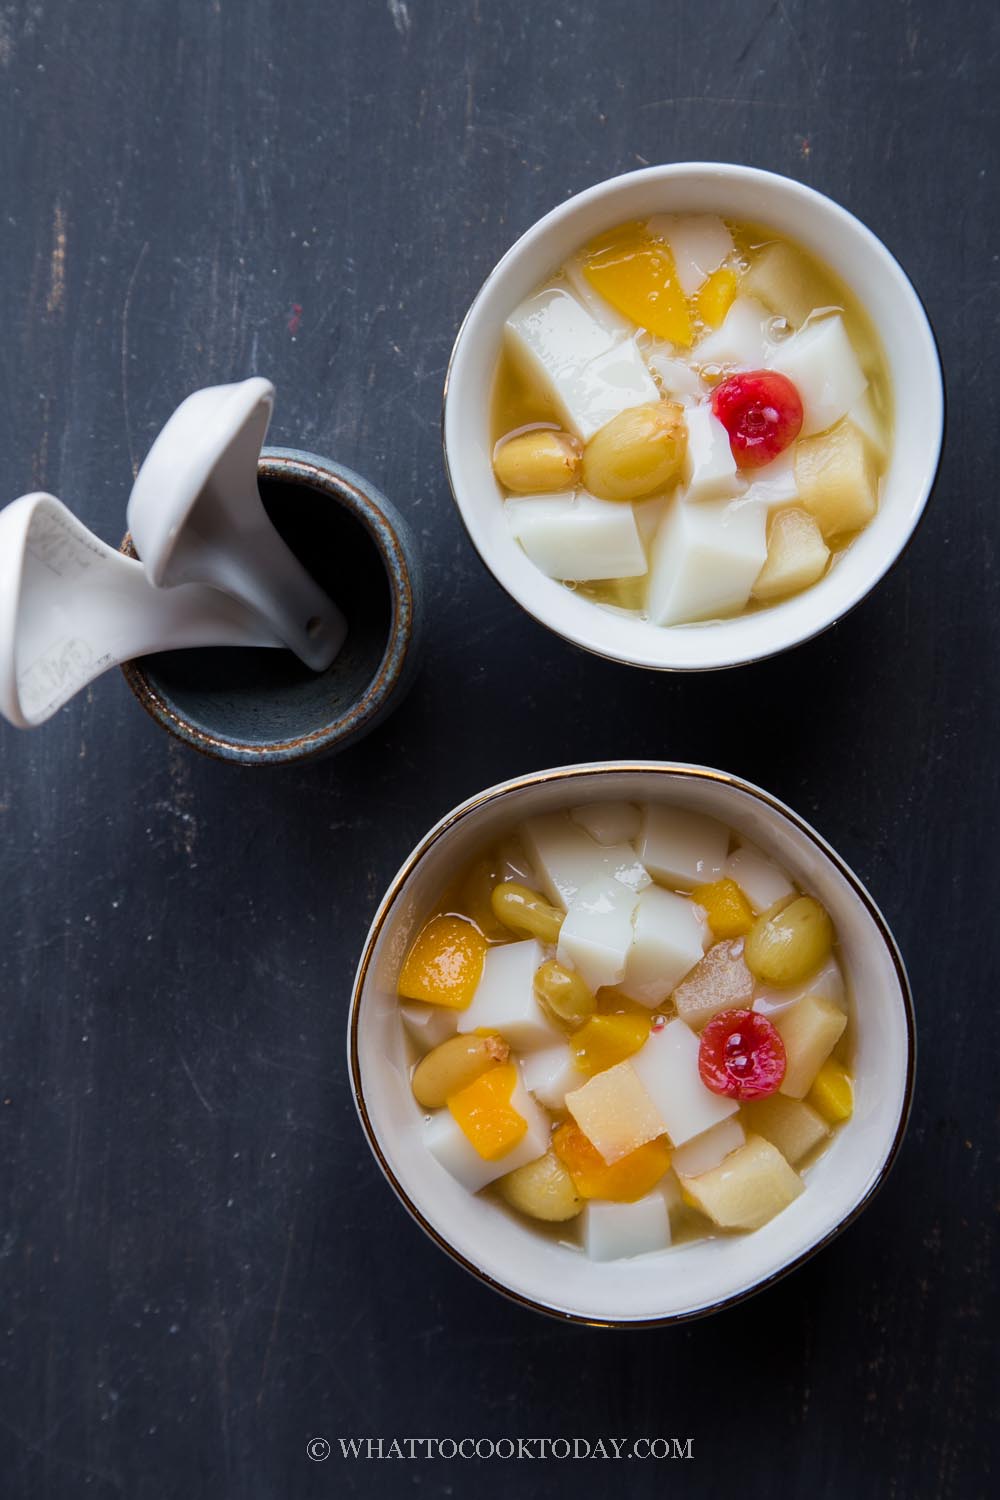 Easy Chinese Almond Jelly /Almond Tofu with Fruit Cocktail